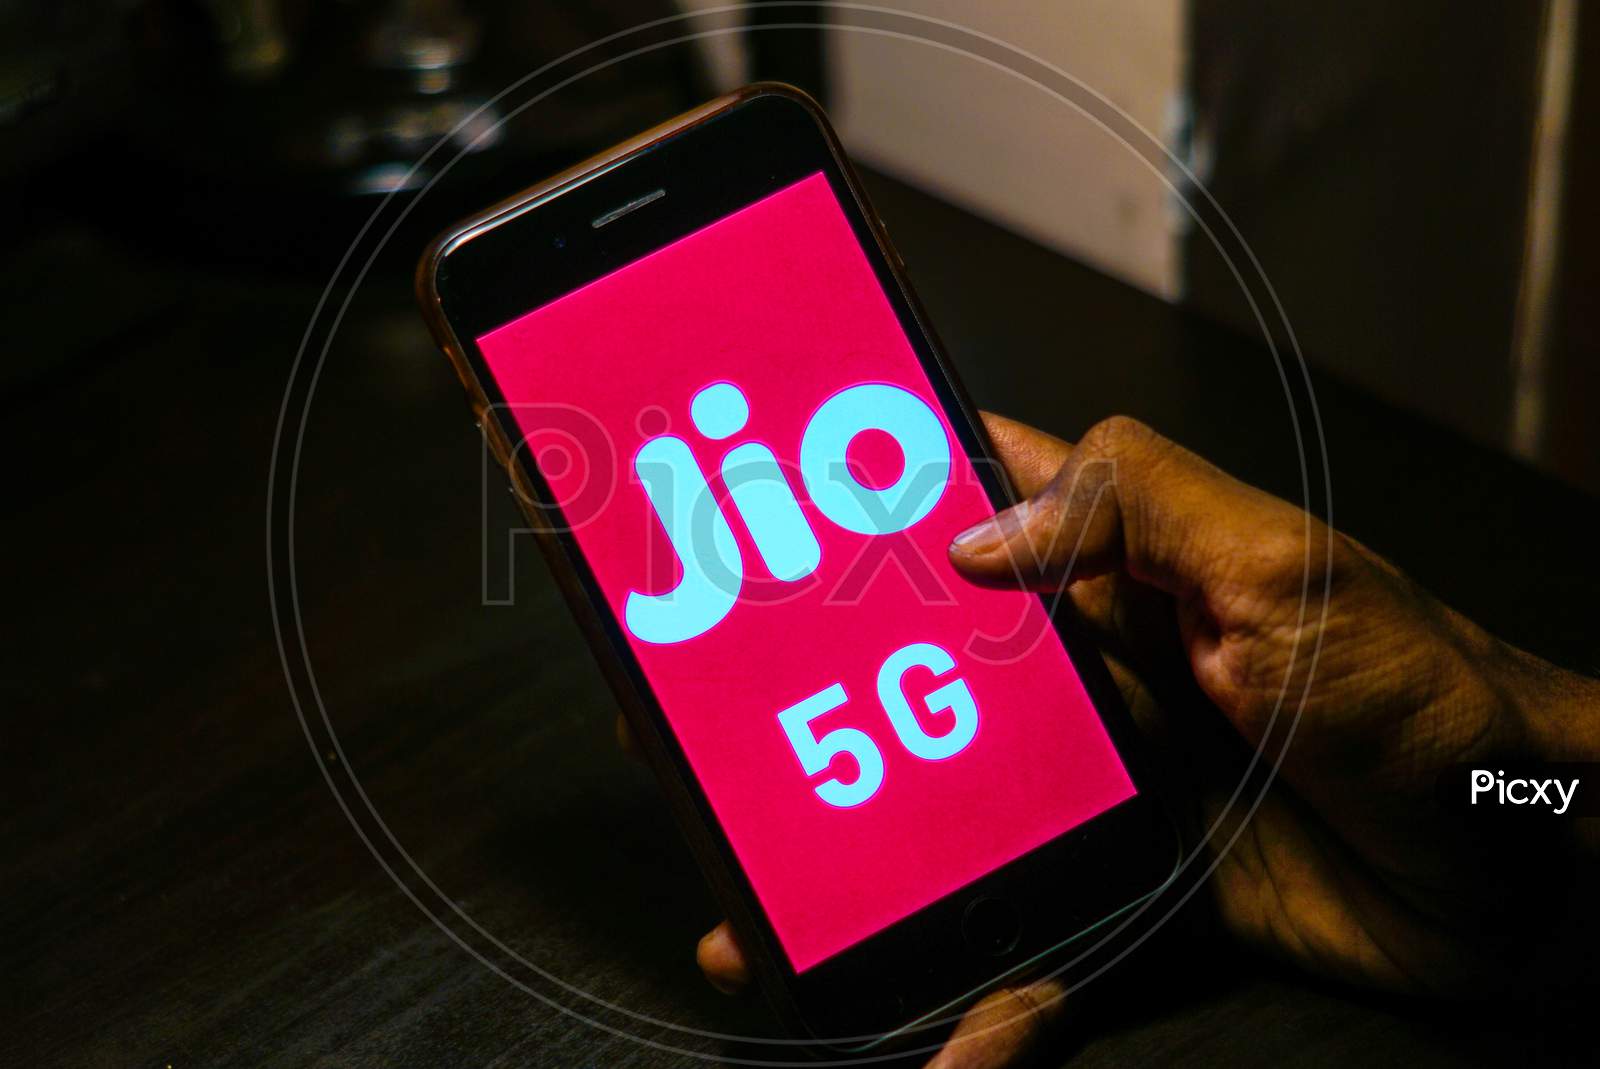 Close up shot of a Person using a Smartphone or Mobile Phone with Jio 5g on Screen